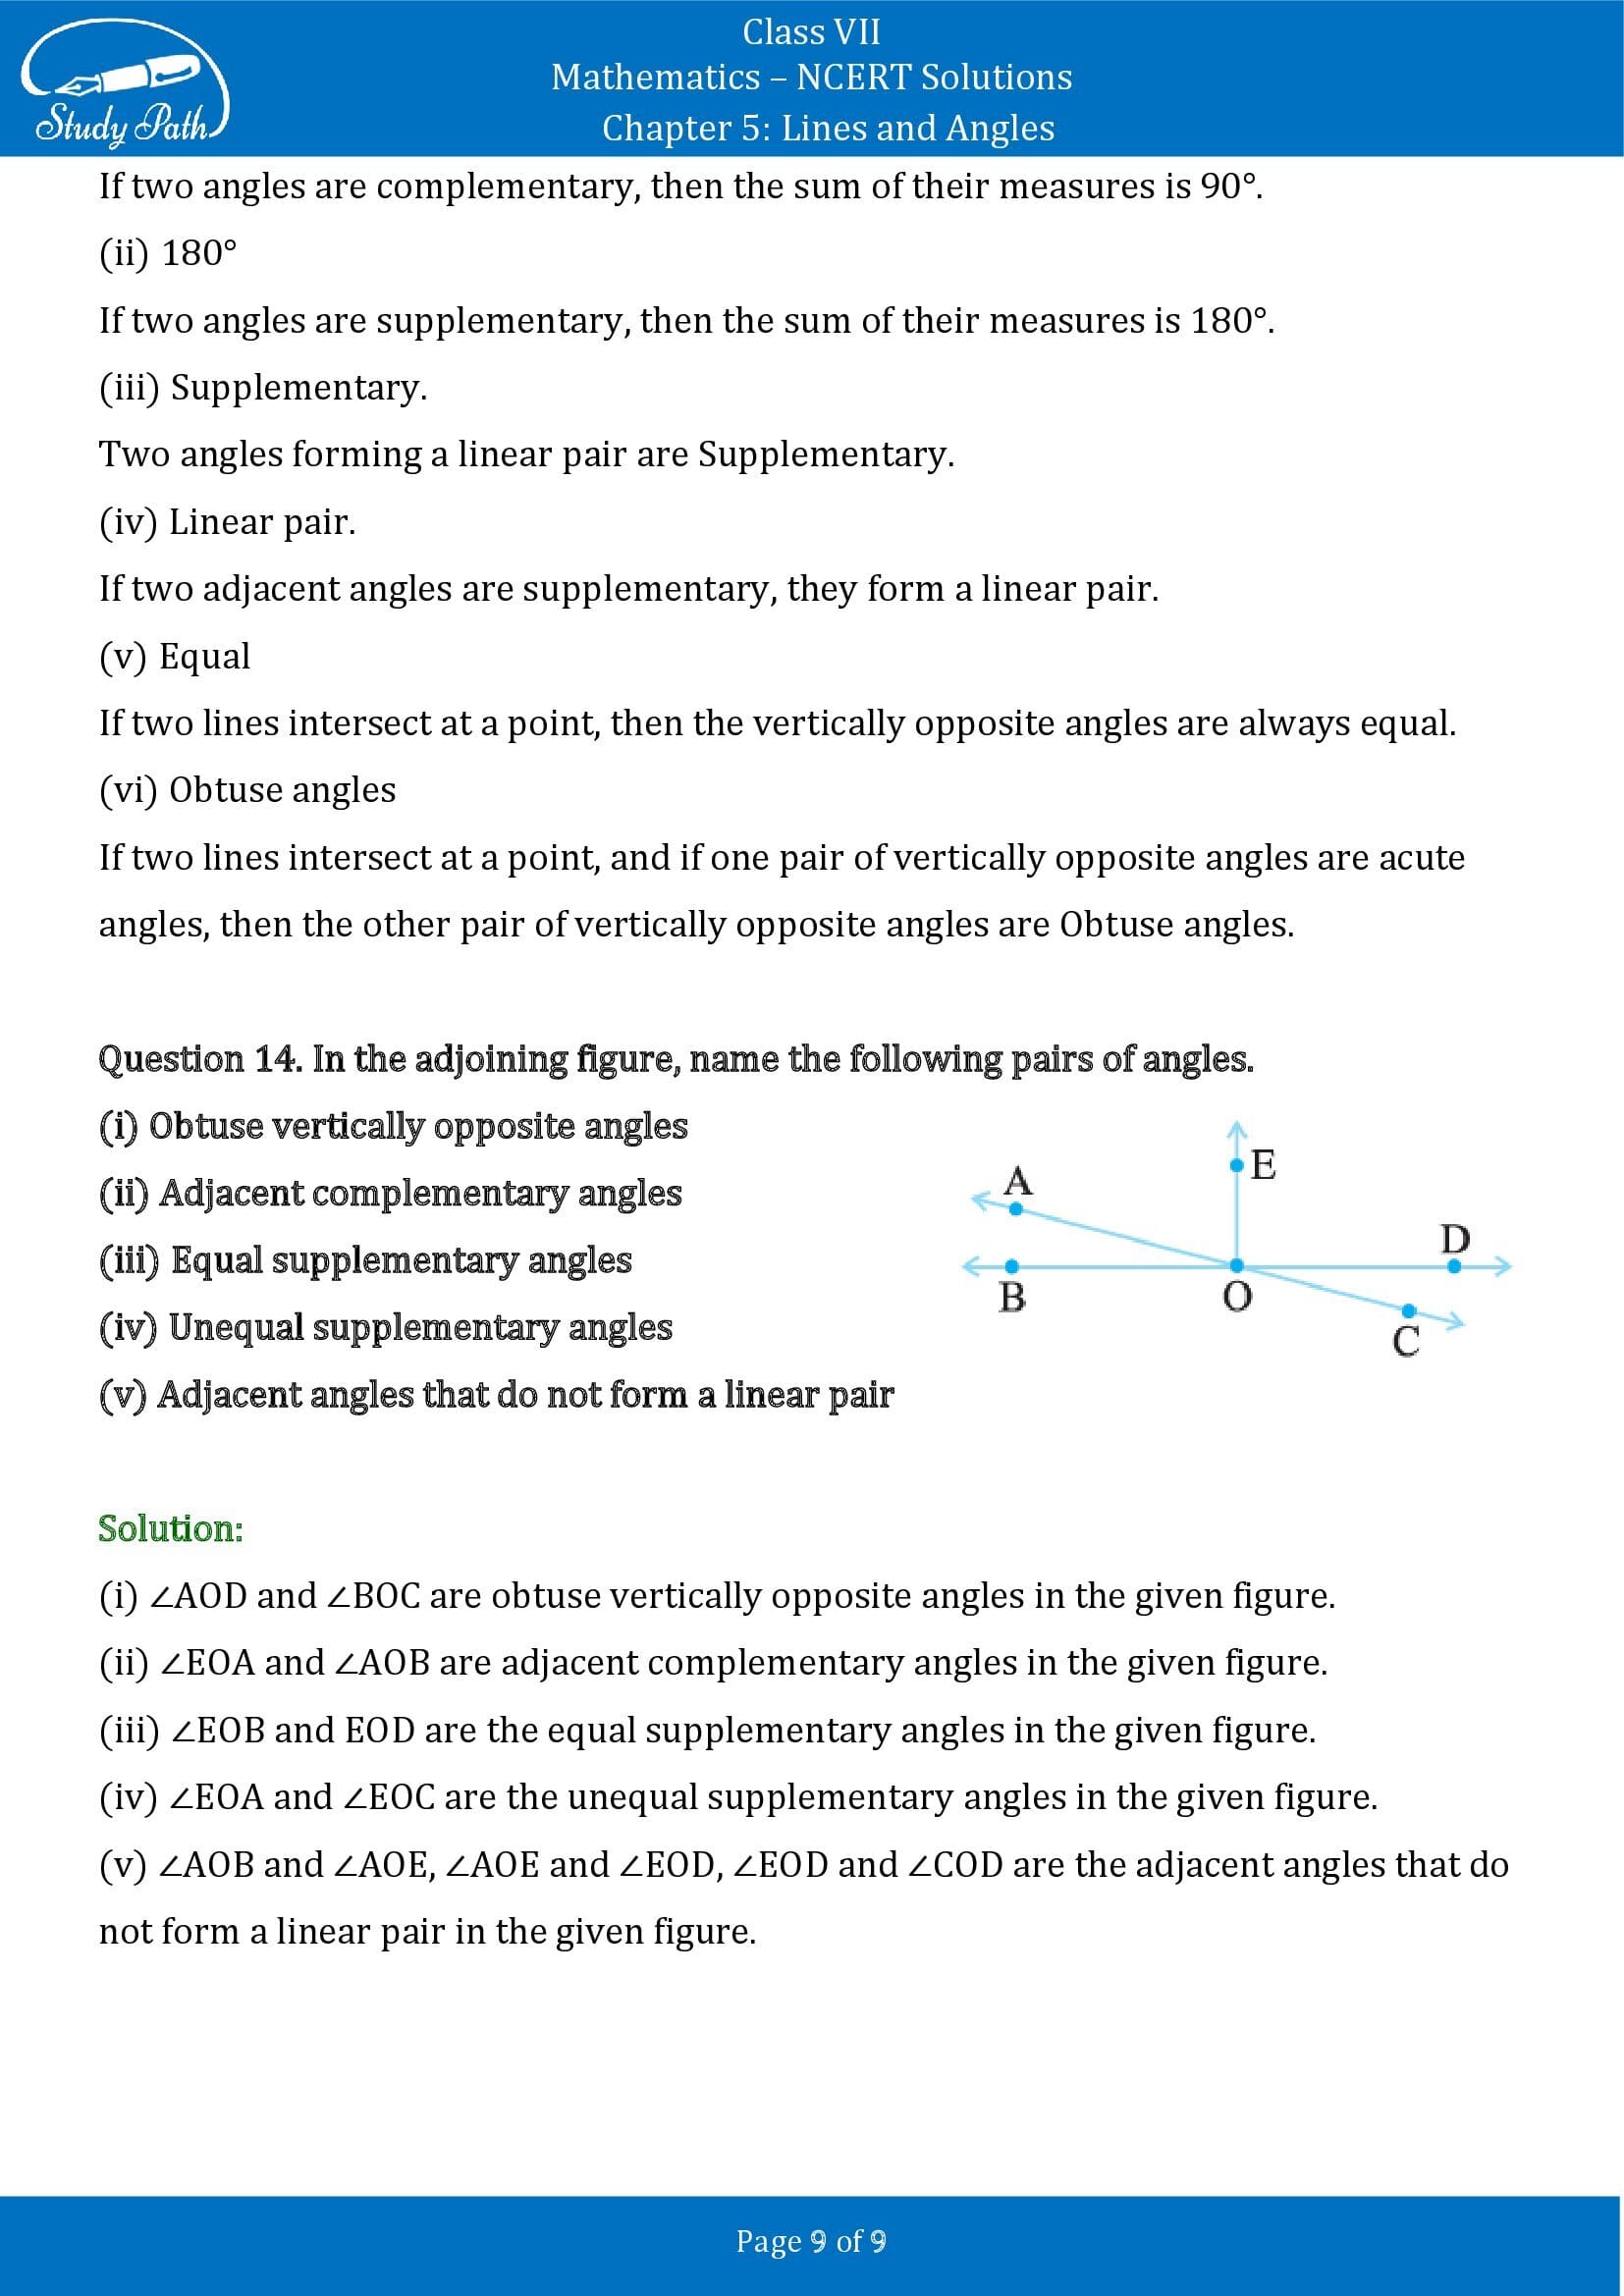 NCERT Solutions for Class 7 Maths Chapter 5 Lines and Angles Exercise 5.1 00009